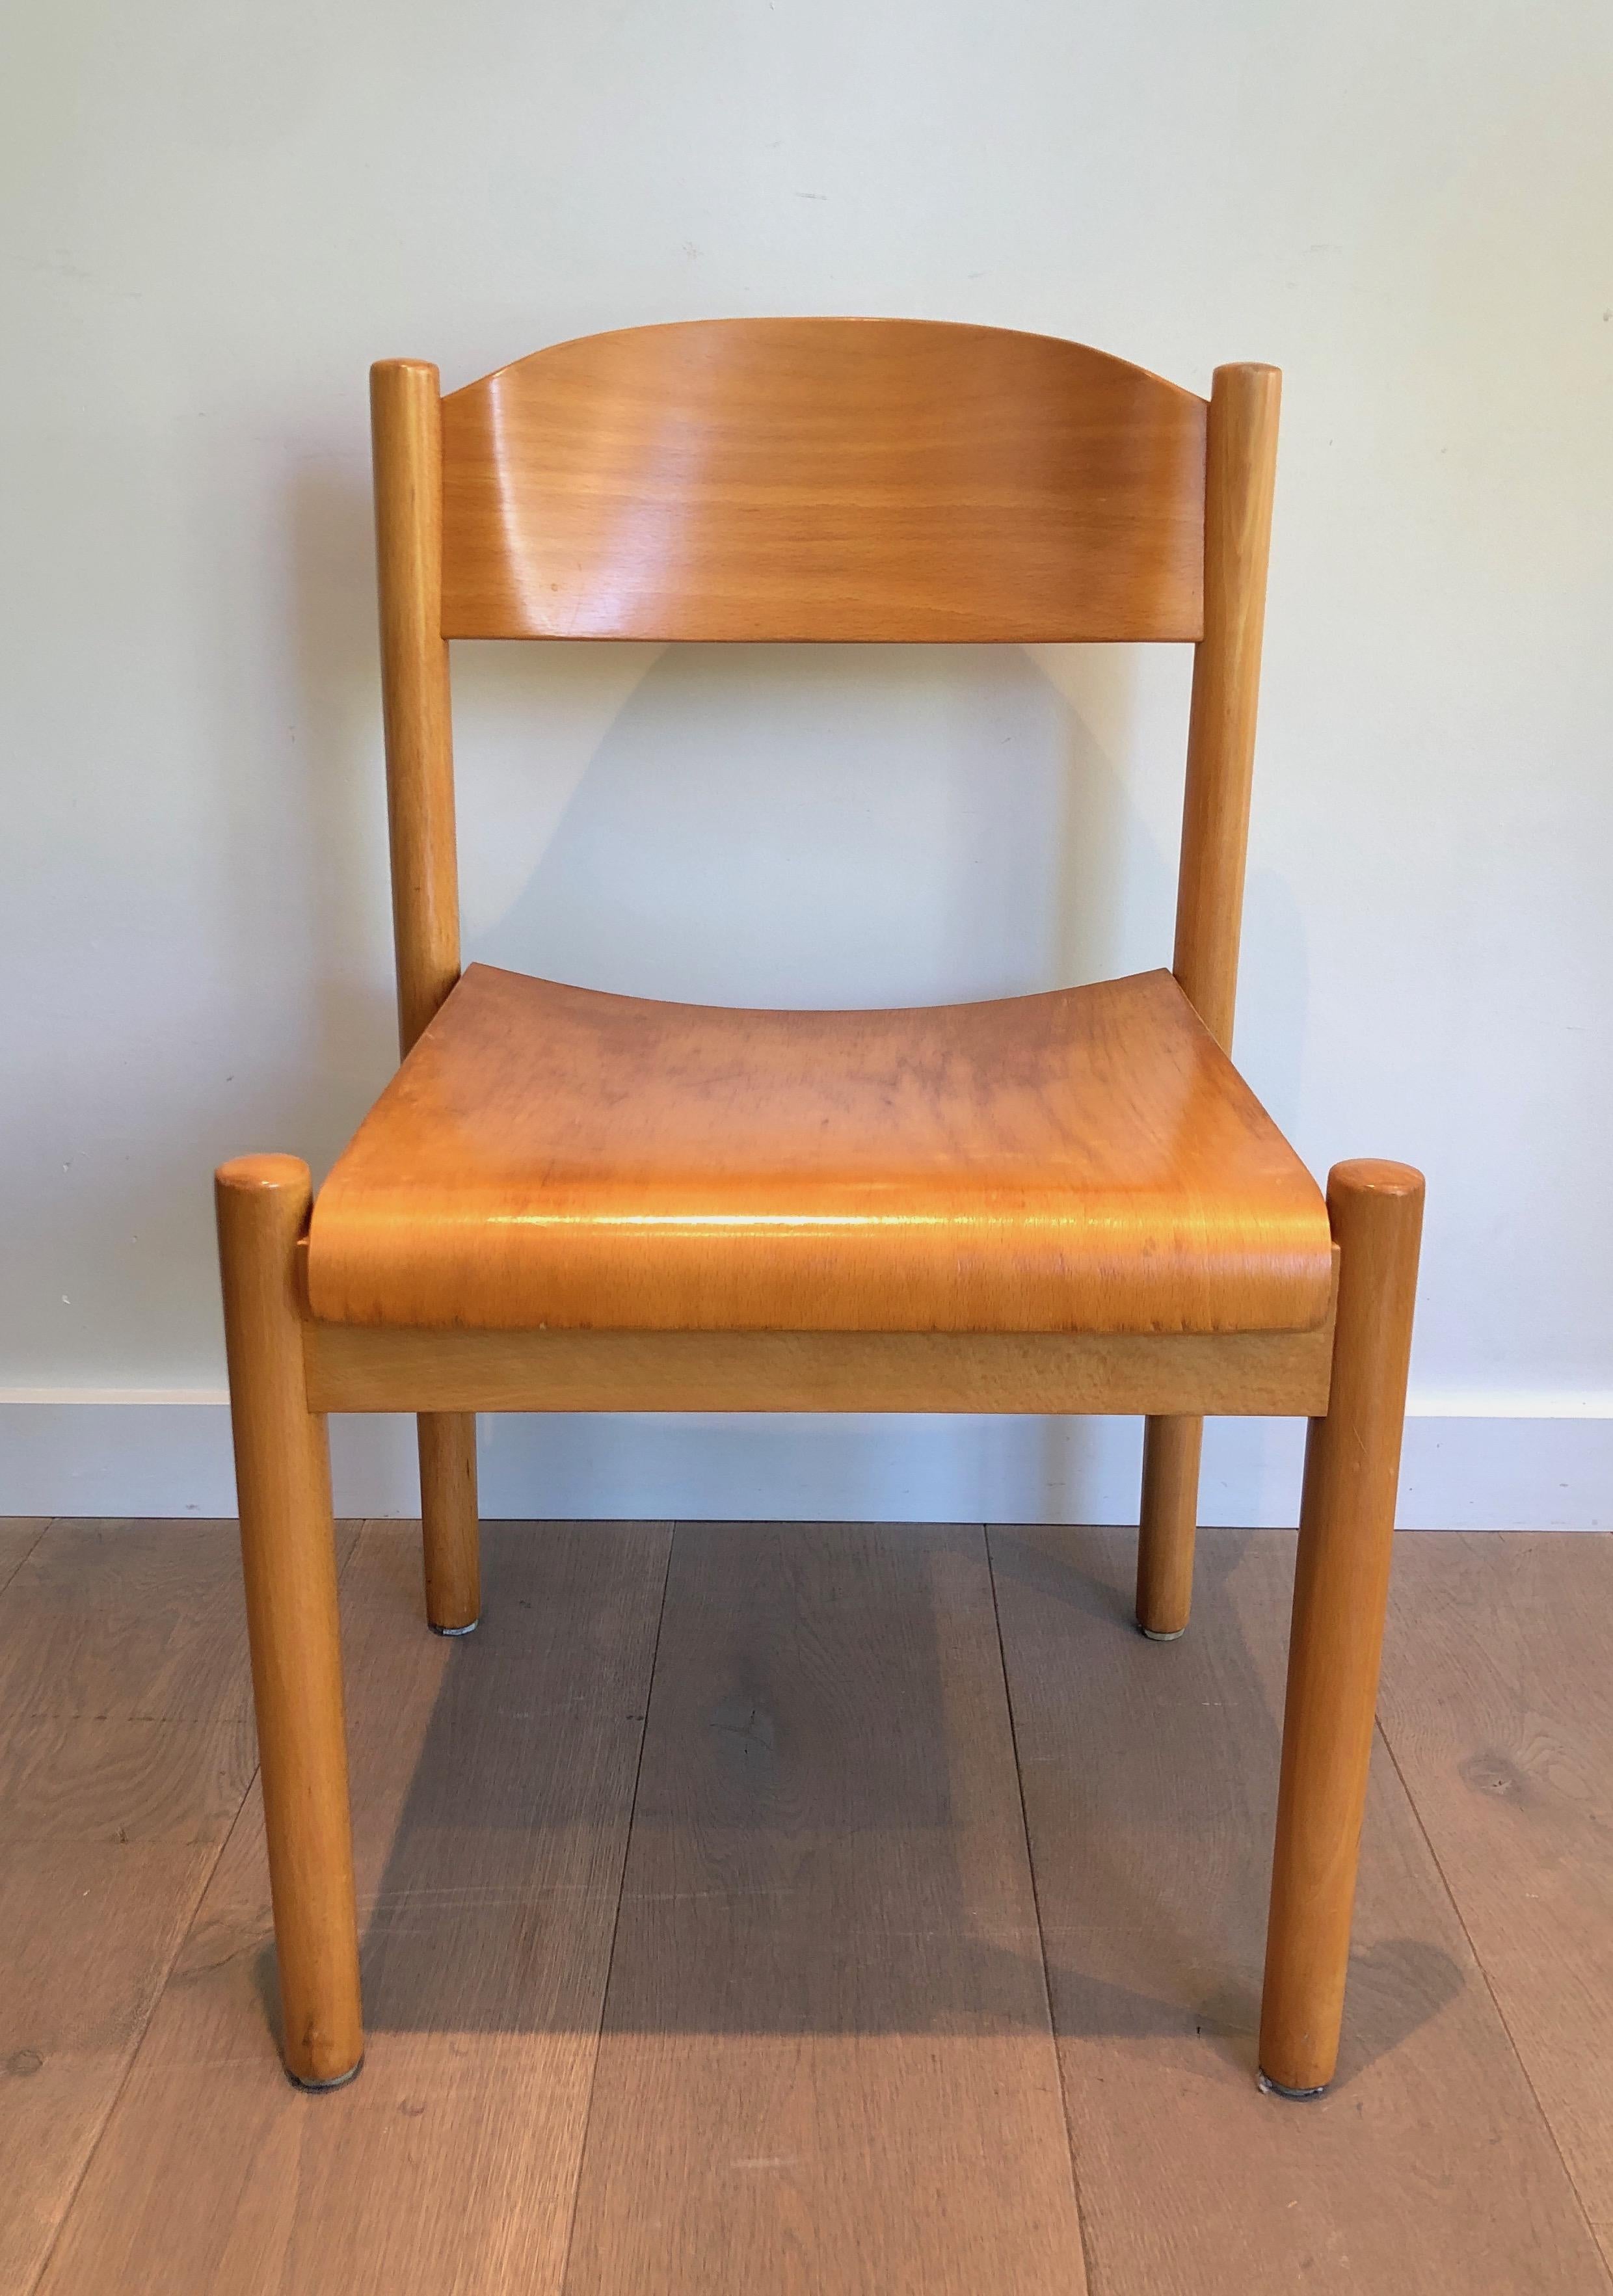 Set of 6 Stackable Pine Chairs, German Work by Karl Klipper, Circa 1970 For Sale 7